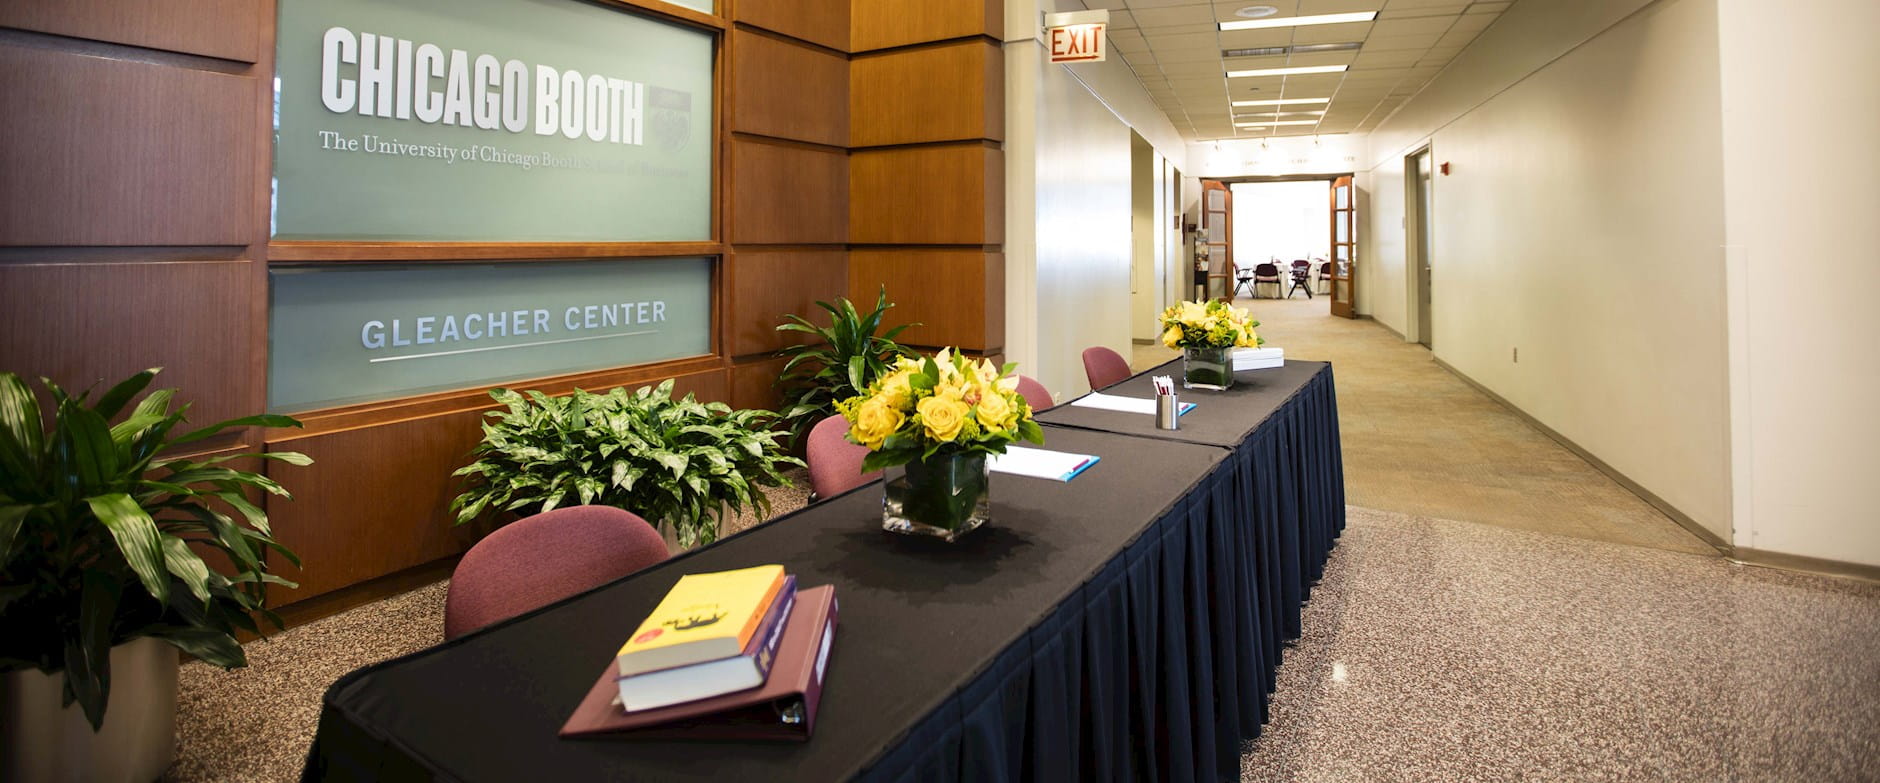 The University of Chicago Booth School of Business Gleacher Center's main floor hallway decorated with yellow flower bouquets 